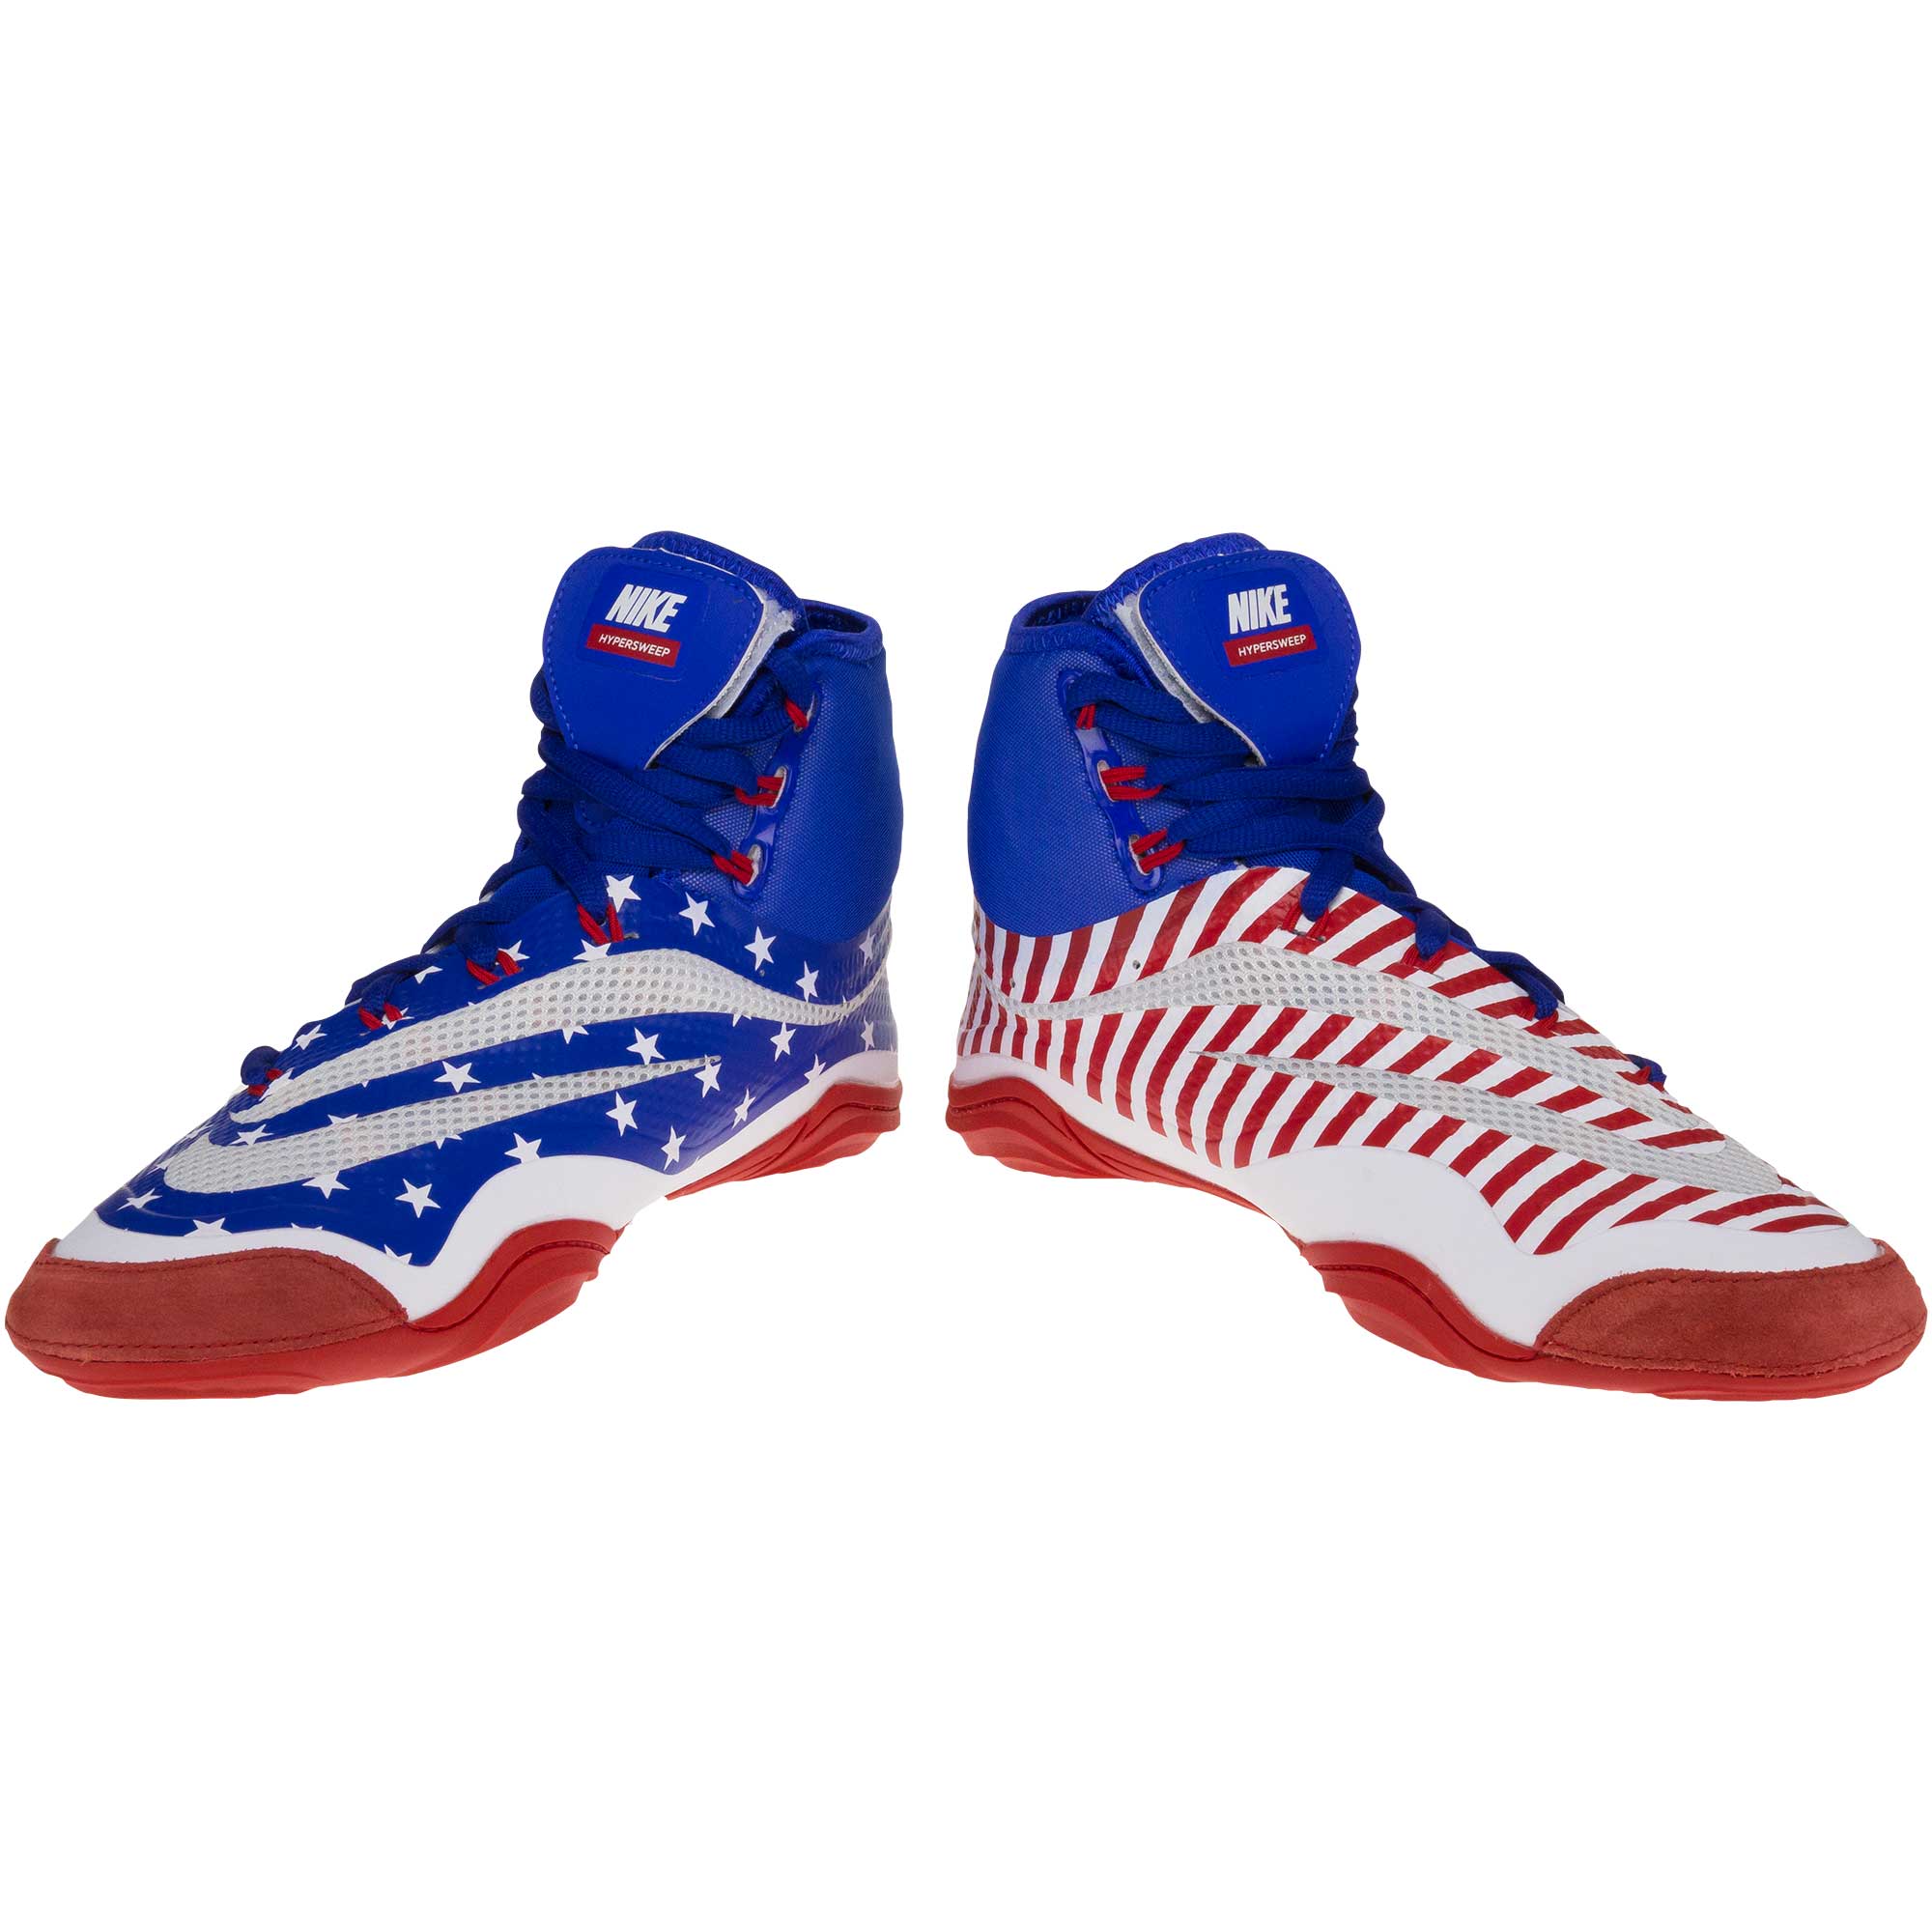 Red and Blue Wrestling Logo - Nike Hypersweep Shoes